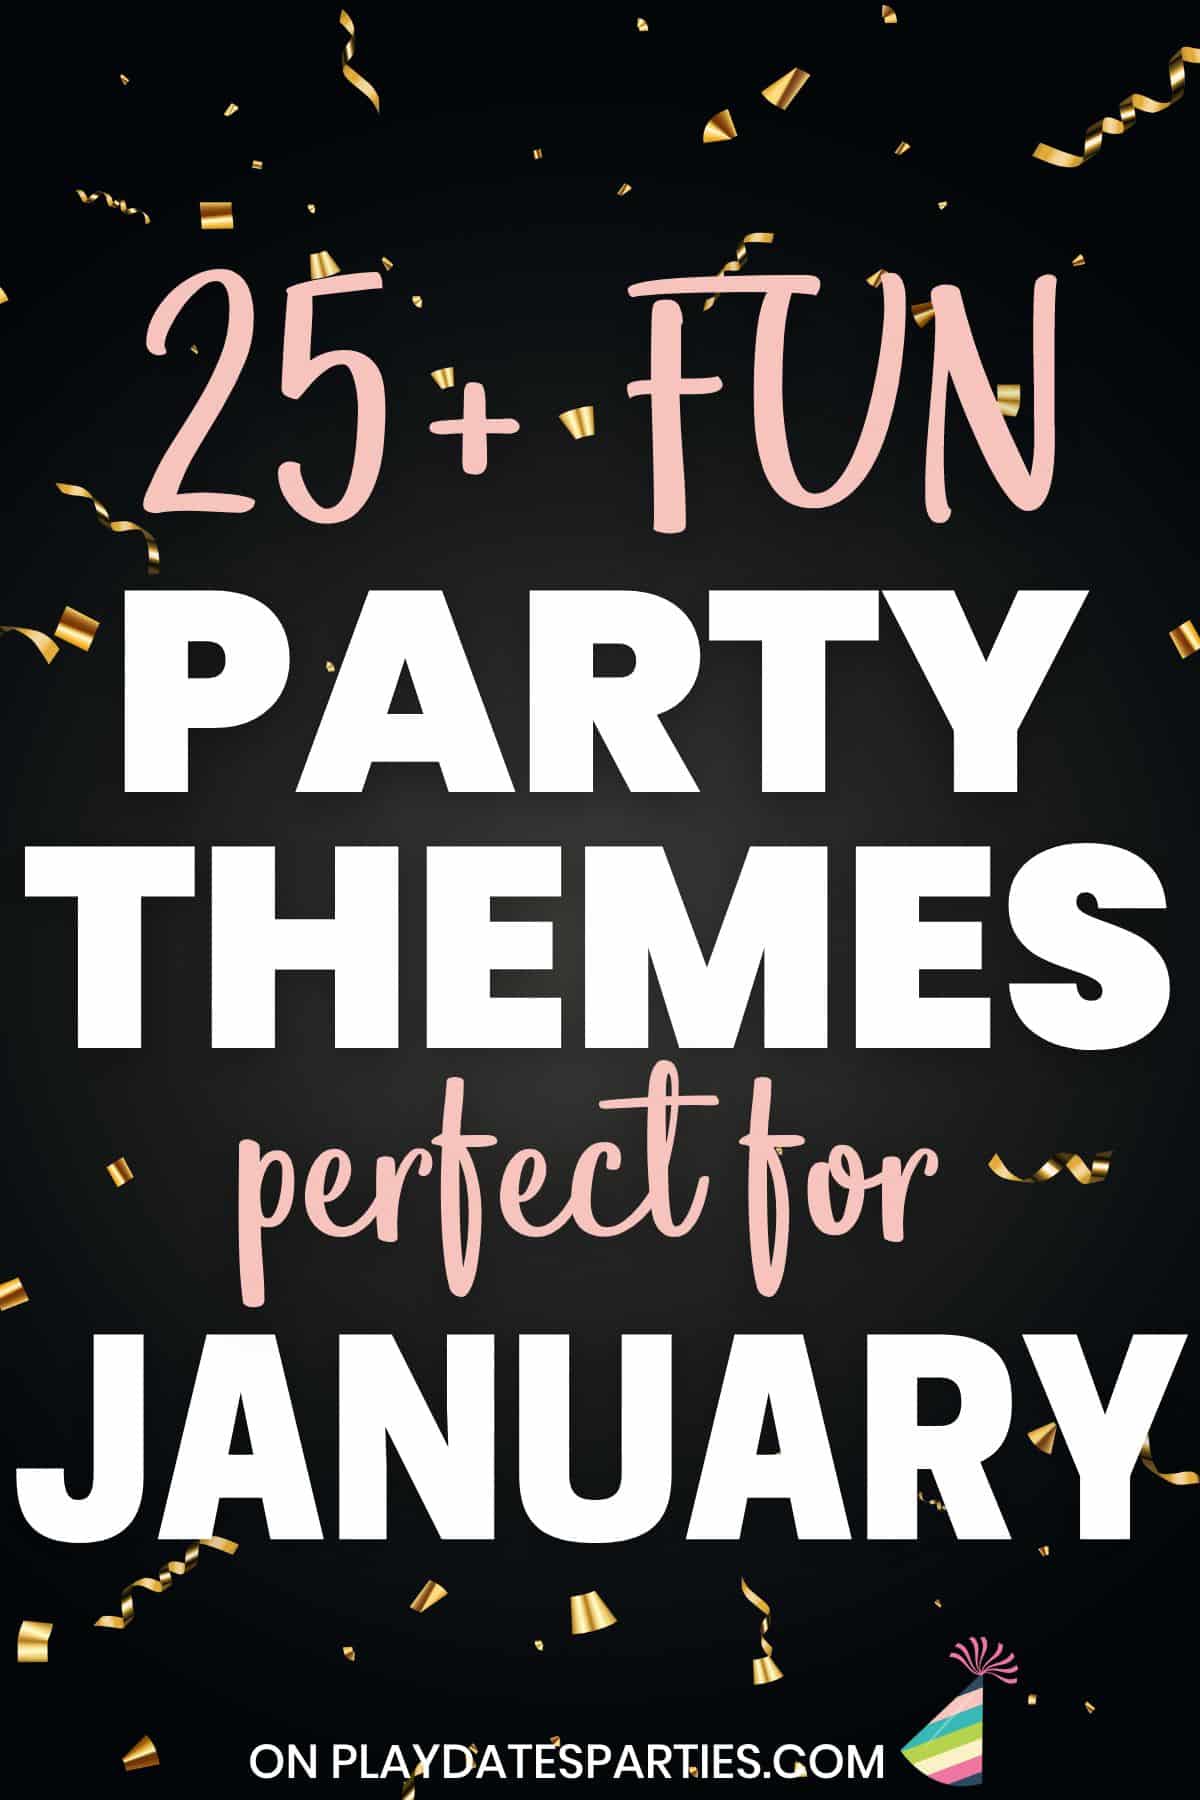 Gold confetti on a black background with text 25+ fun party themes perfect for January.